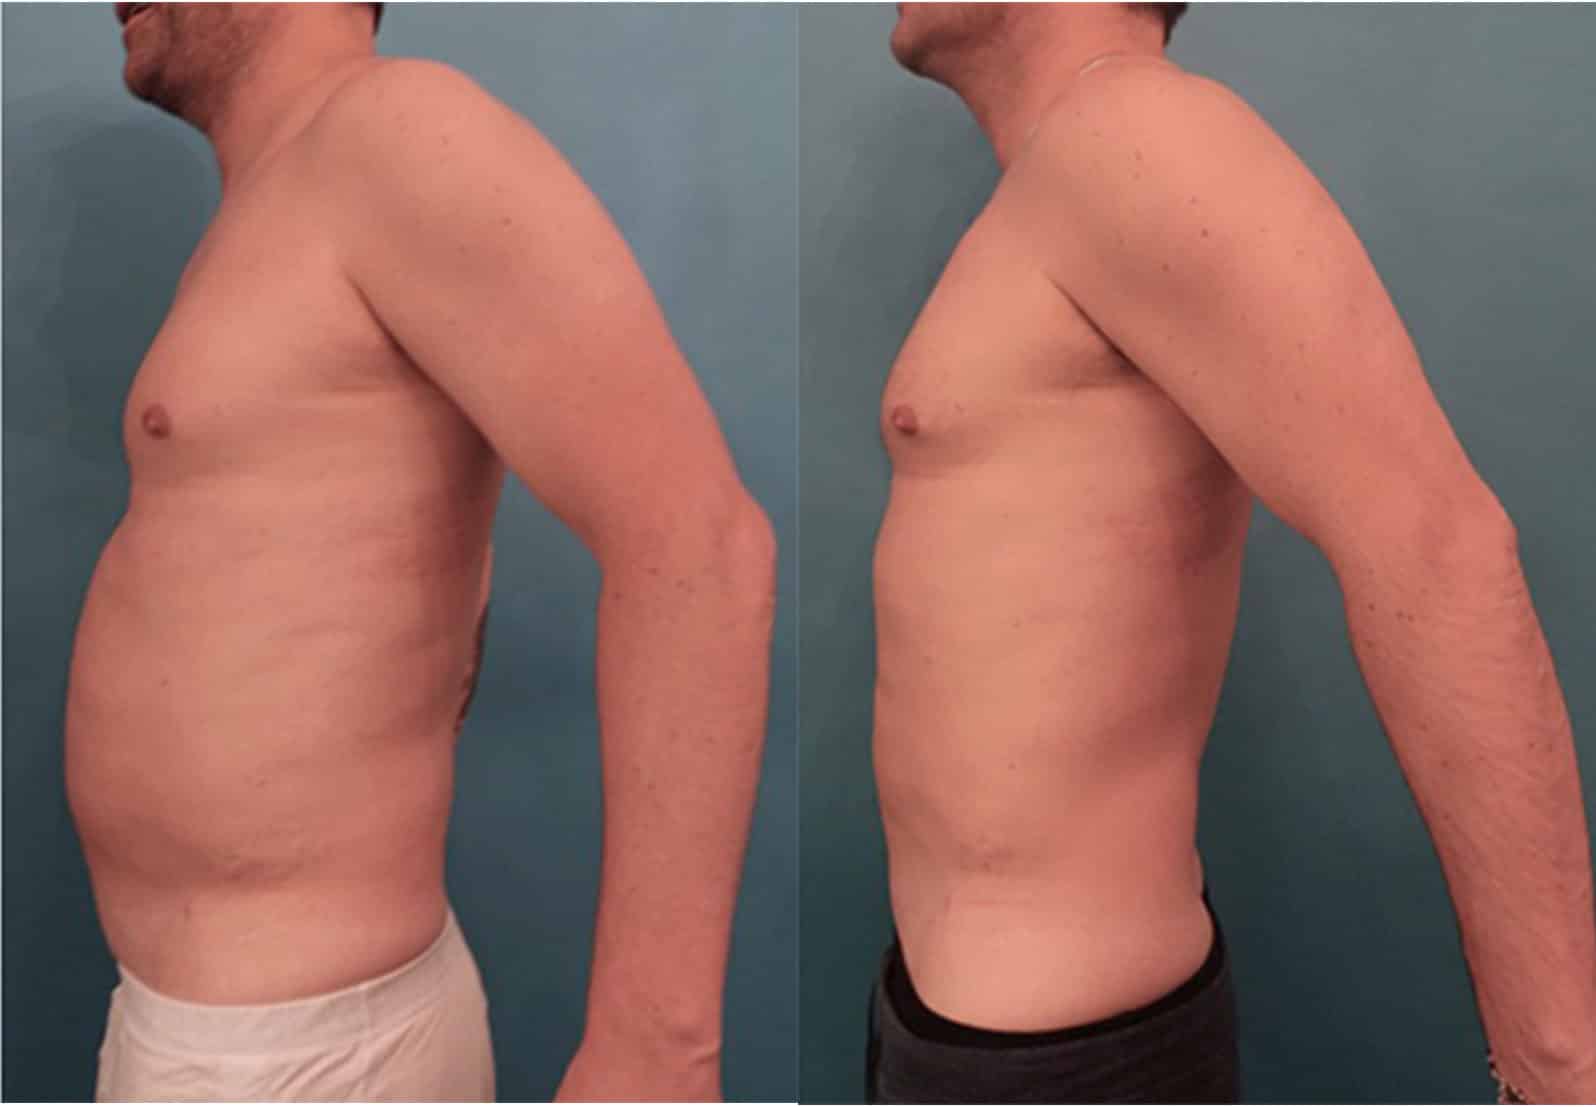 A before and after image set of a man that underwent a Kybella body contouring in NYC